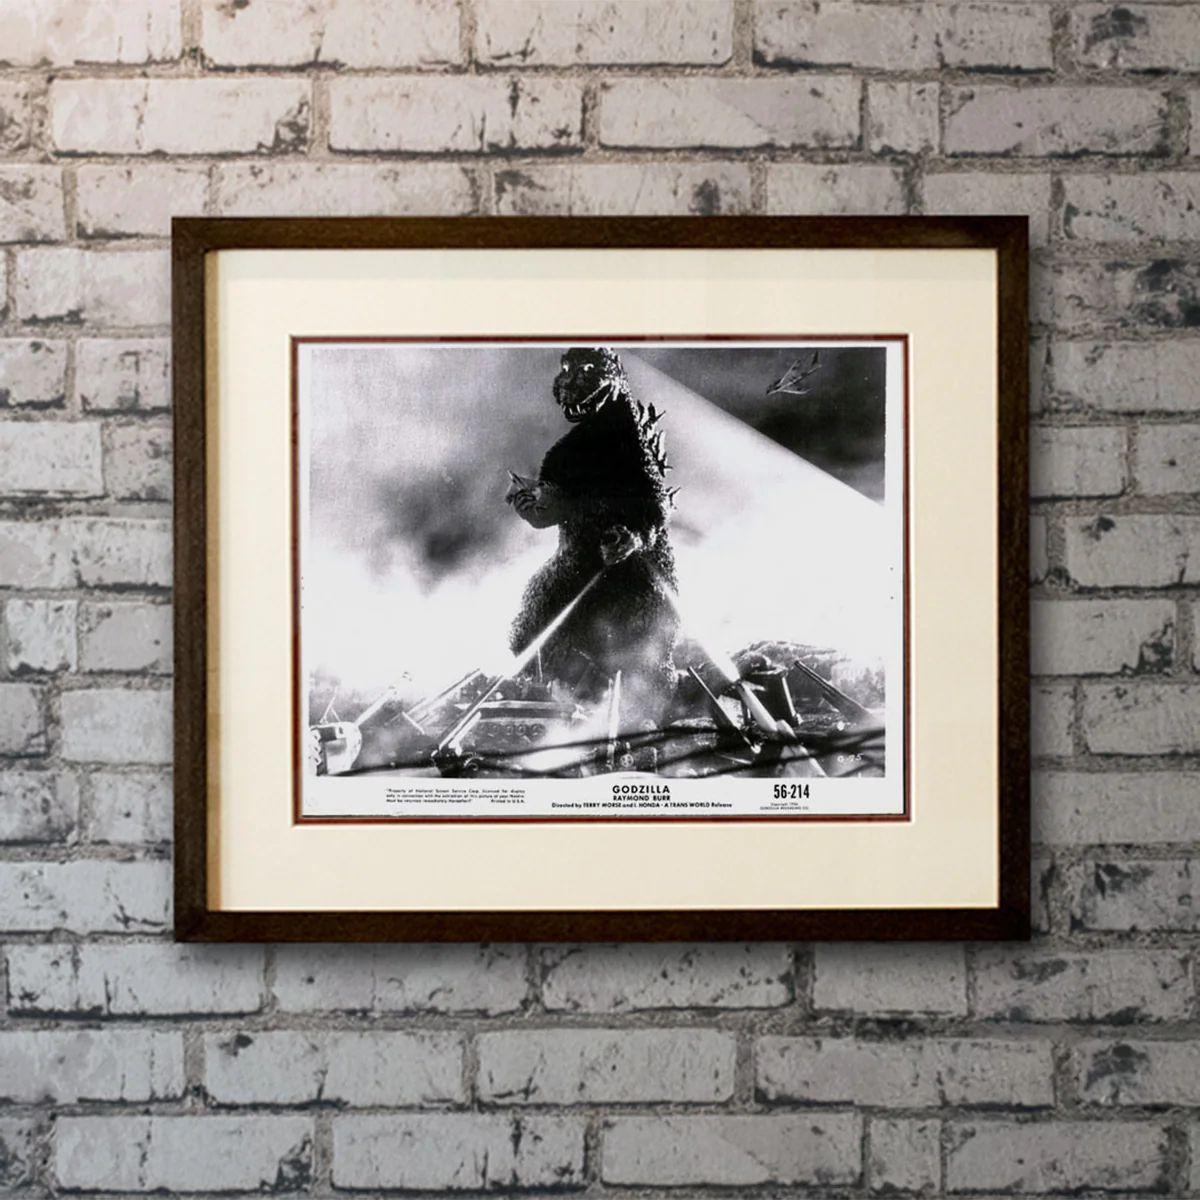 Godzilla, Unframed Poster, 1956

Photo-Still (8 X 10 Inches). American nuclear-weapons testing results in the creation of a seemingly unstoppable, dinosaur-like beast.

Additional Information:
Year: 1956
Nationality: United States
Type: